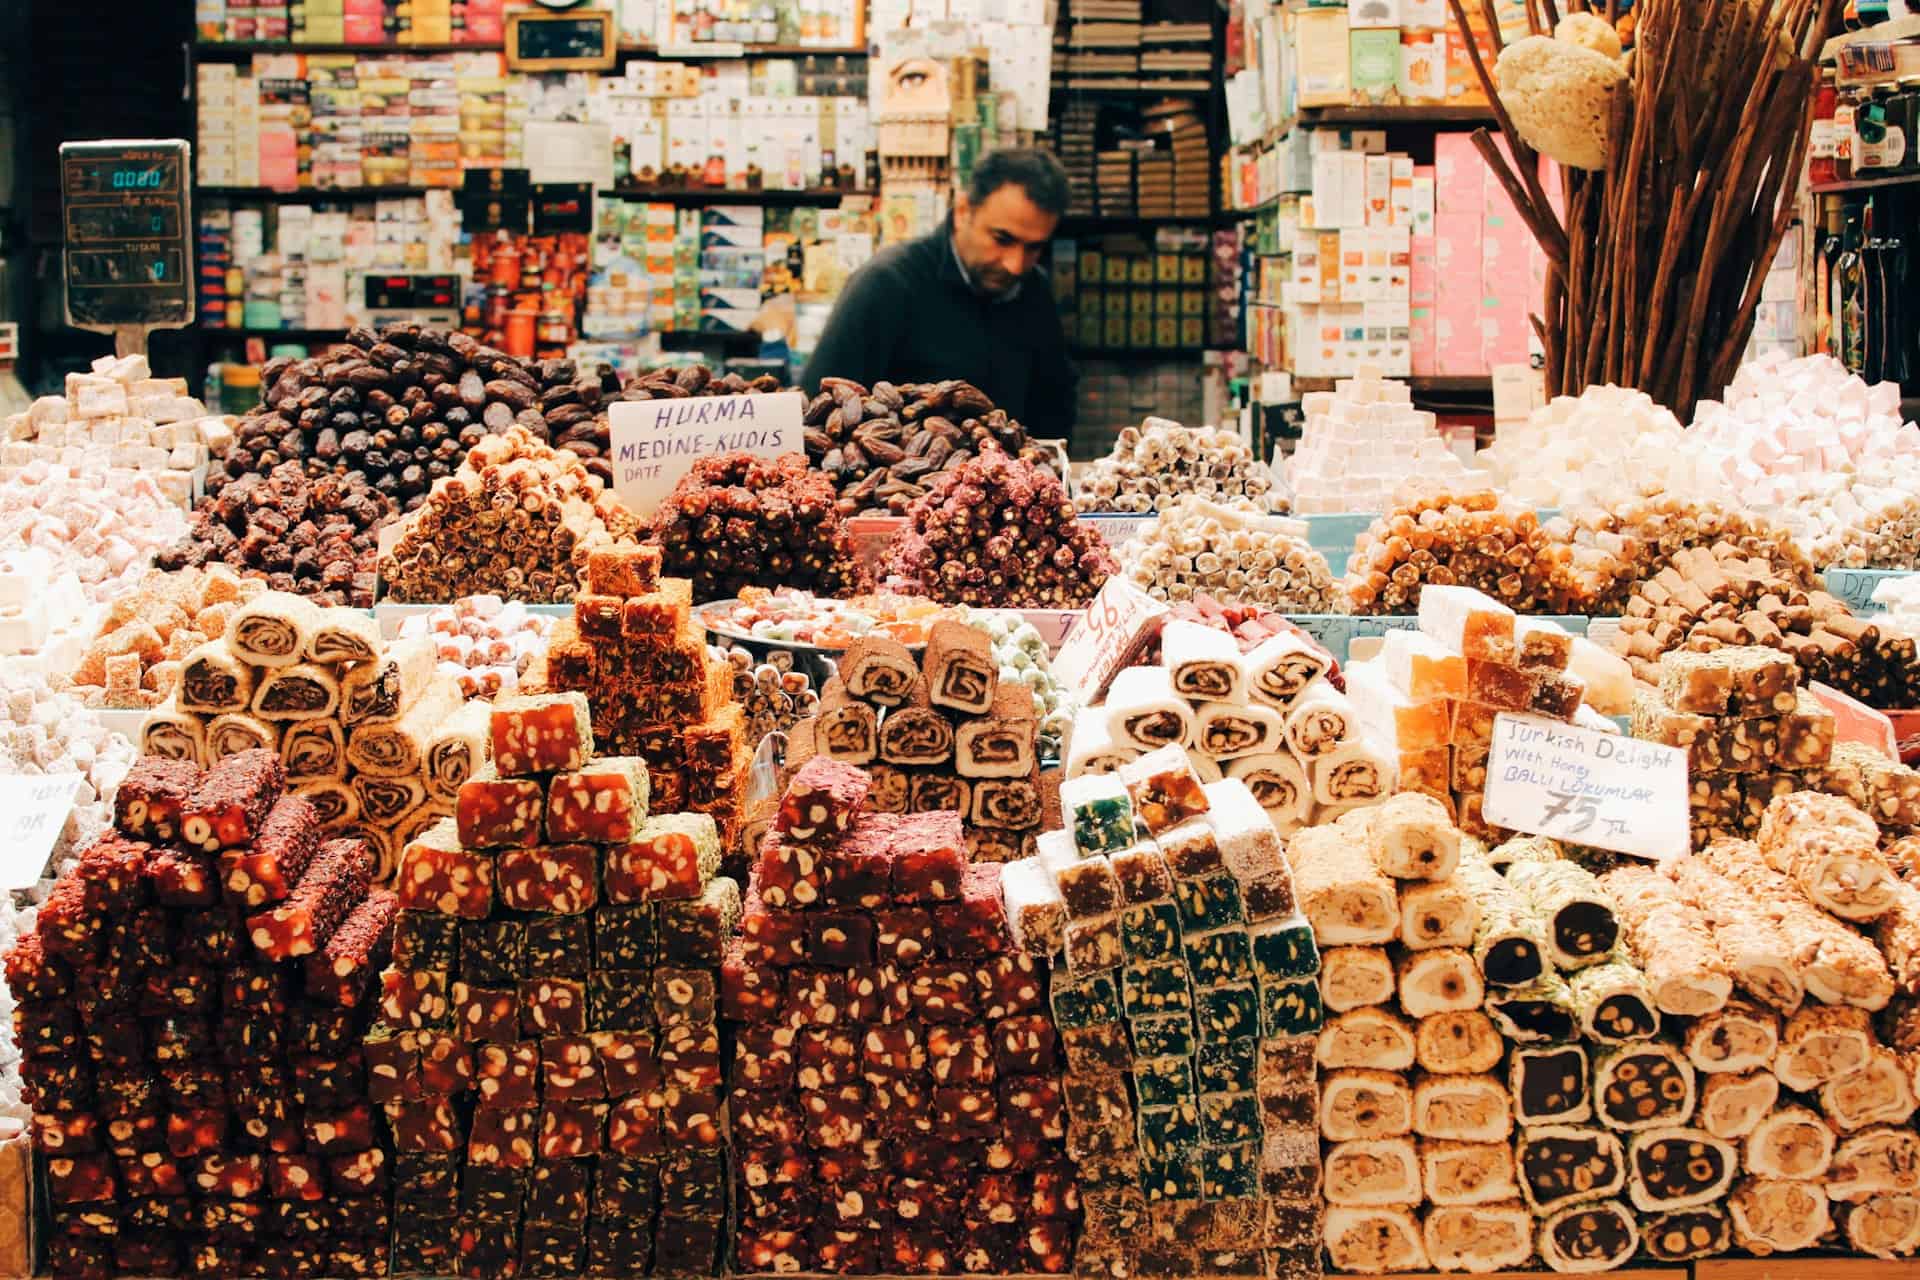 Best things to do in Istanbul Turkey - Pinar Tarhan - Turkish delight and other treats for sale by Michael Parulava on Unsplash